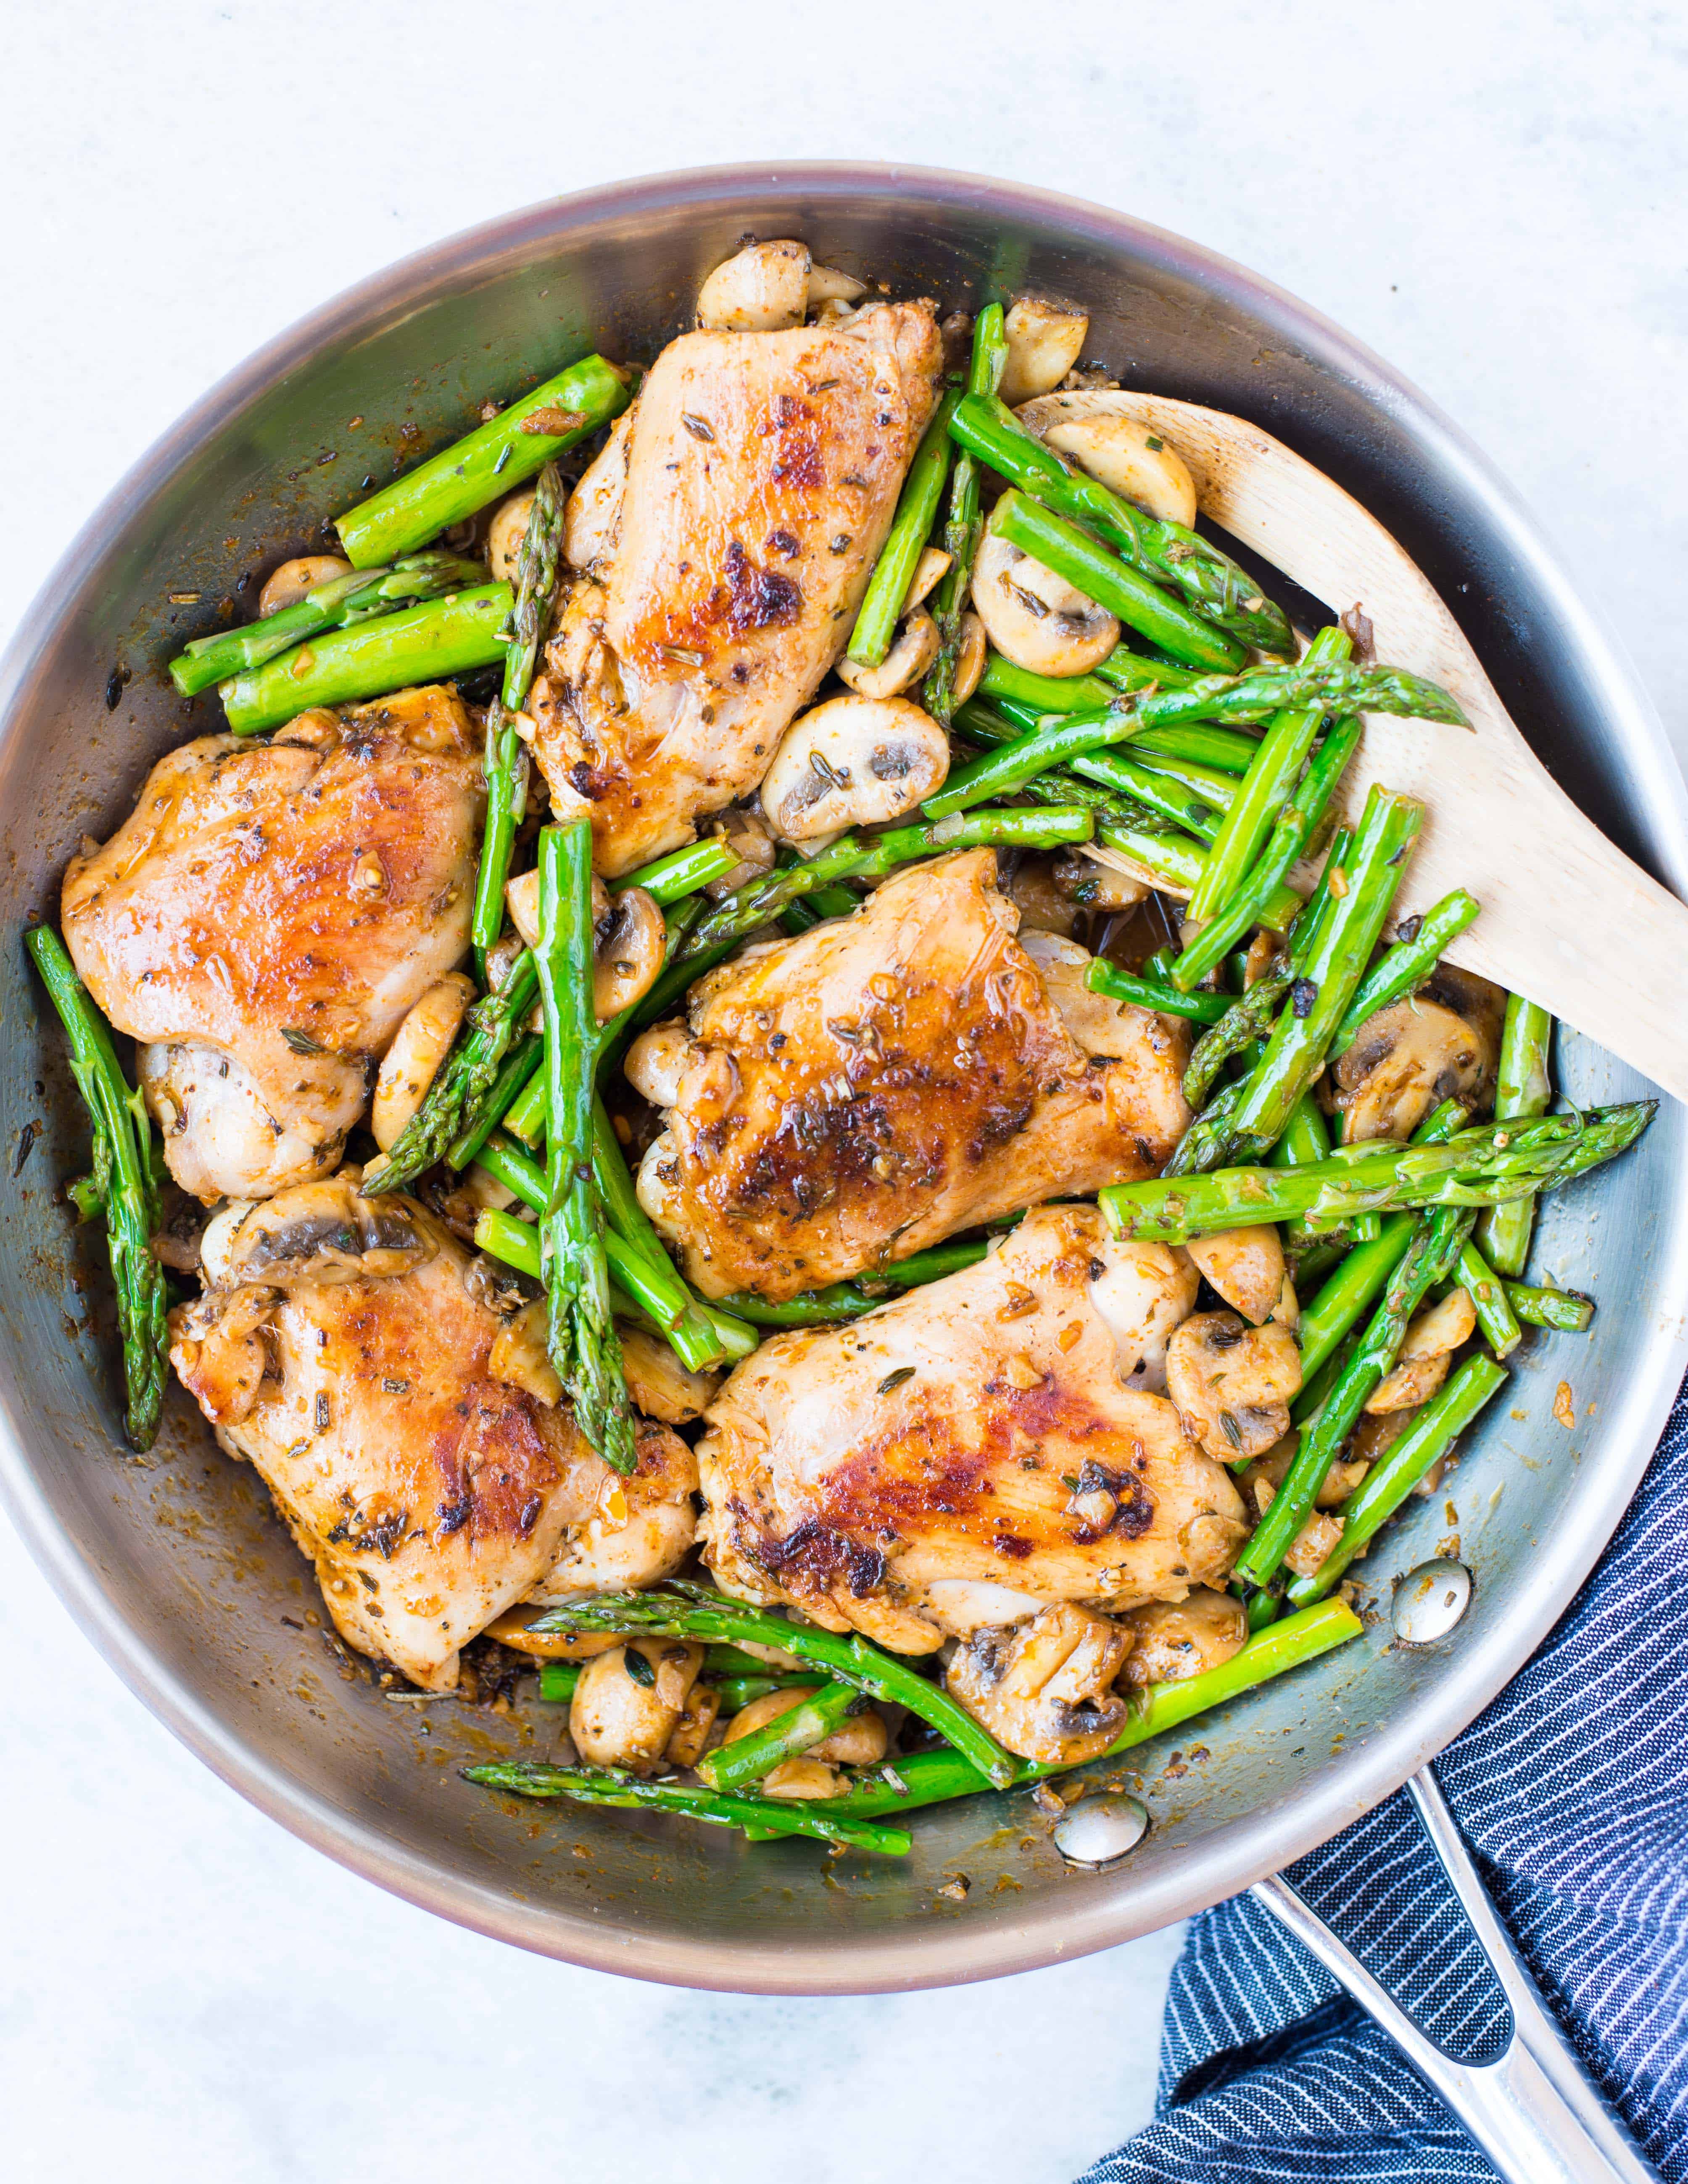 One-pan dish of chicken, asparagus and mushroom in a lemon butter herb sauce.